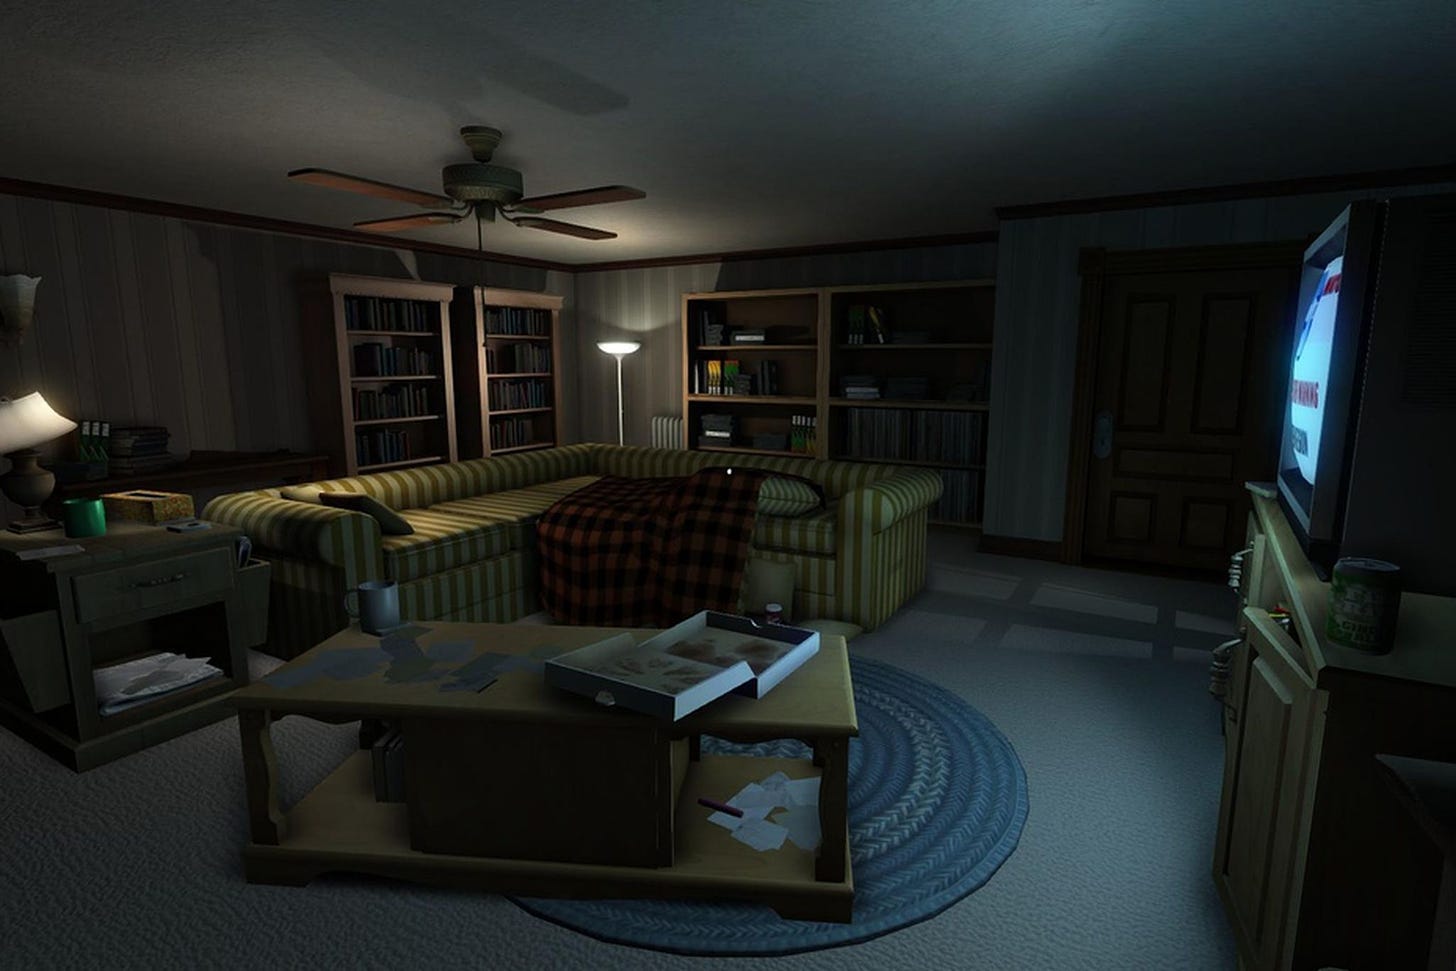 Screenshot from the game. A dimly lit sittingroom. The TV is on, set to a storm warning card. An empty pizza box sits on the coffee table.